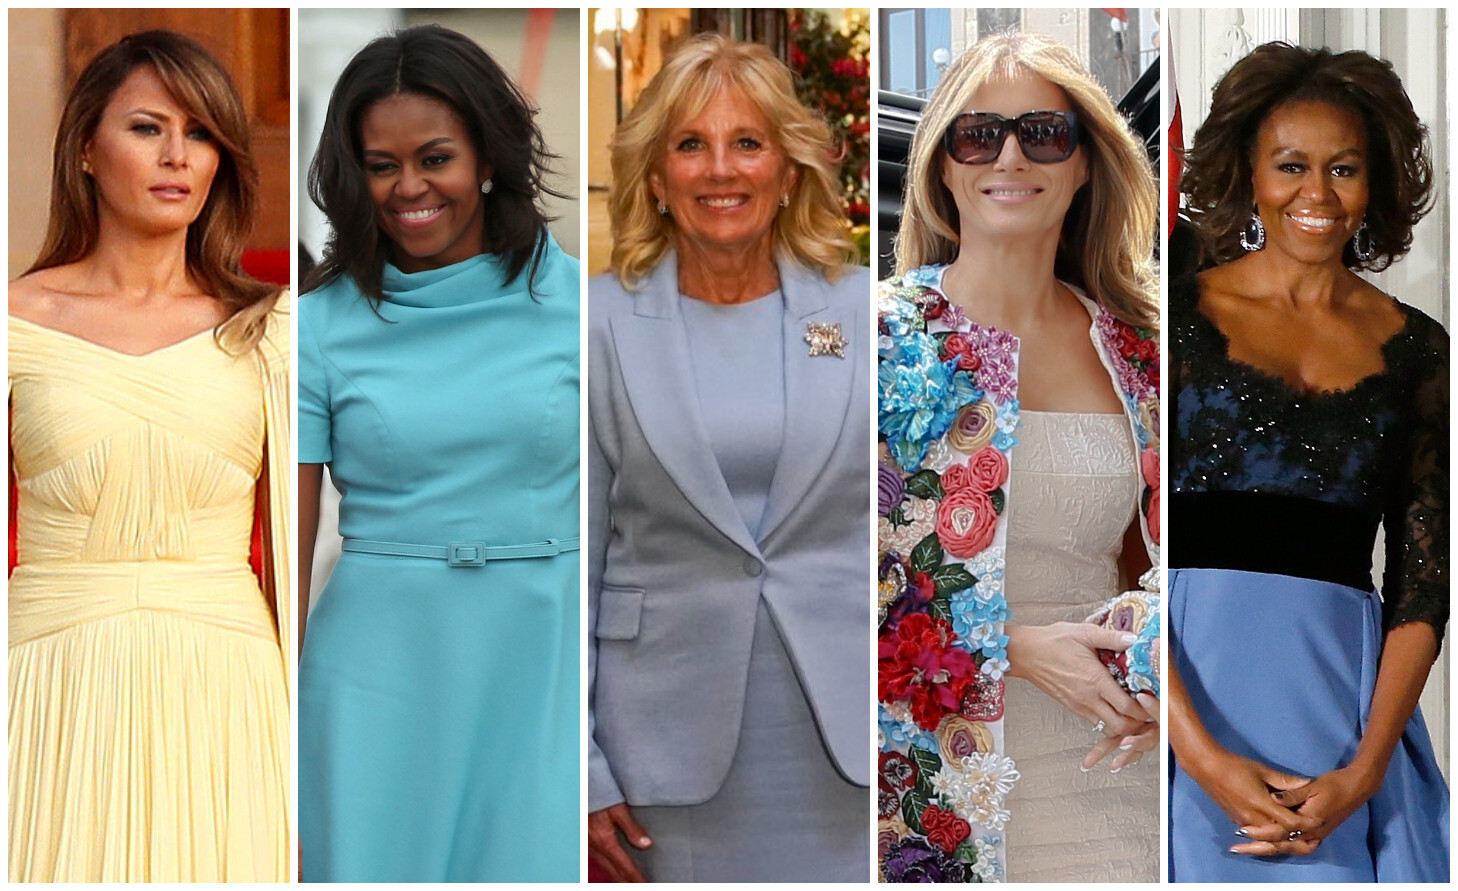 These outfits that US first ladies Melania Trump, Michelle Obama and Jill Biden wore are not only eye-catching, but also have a hefty price tag. Photos: Reuters, AFP, @parsnippo/Twitter, AP